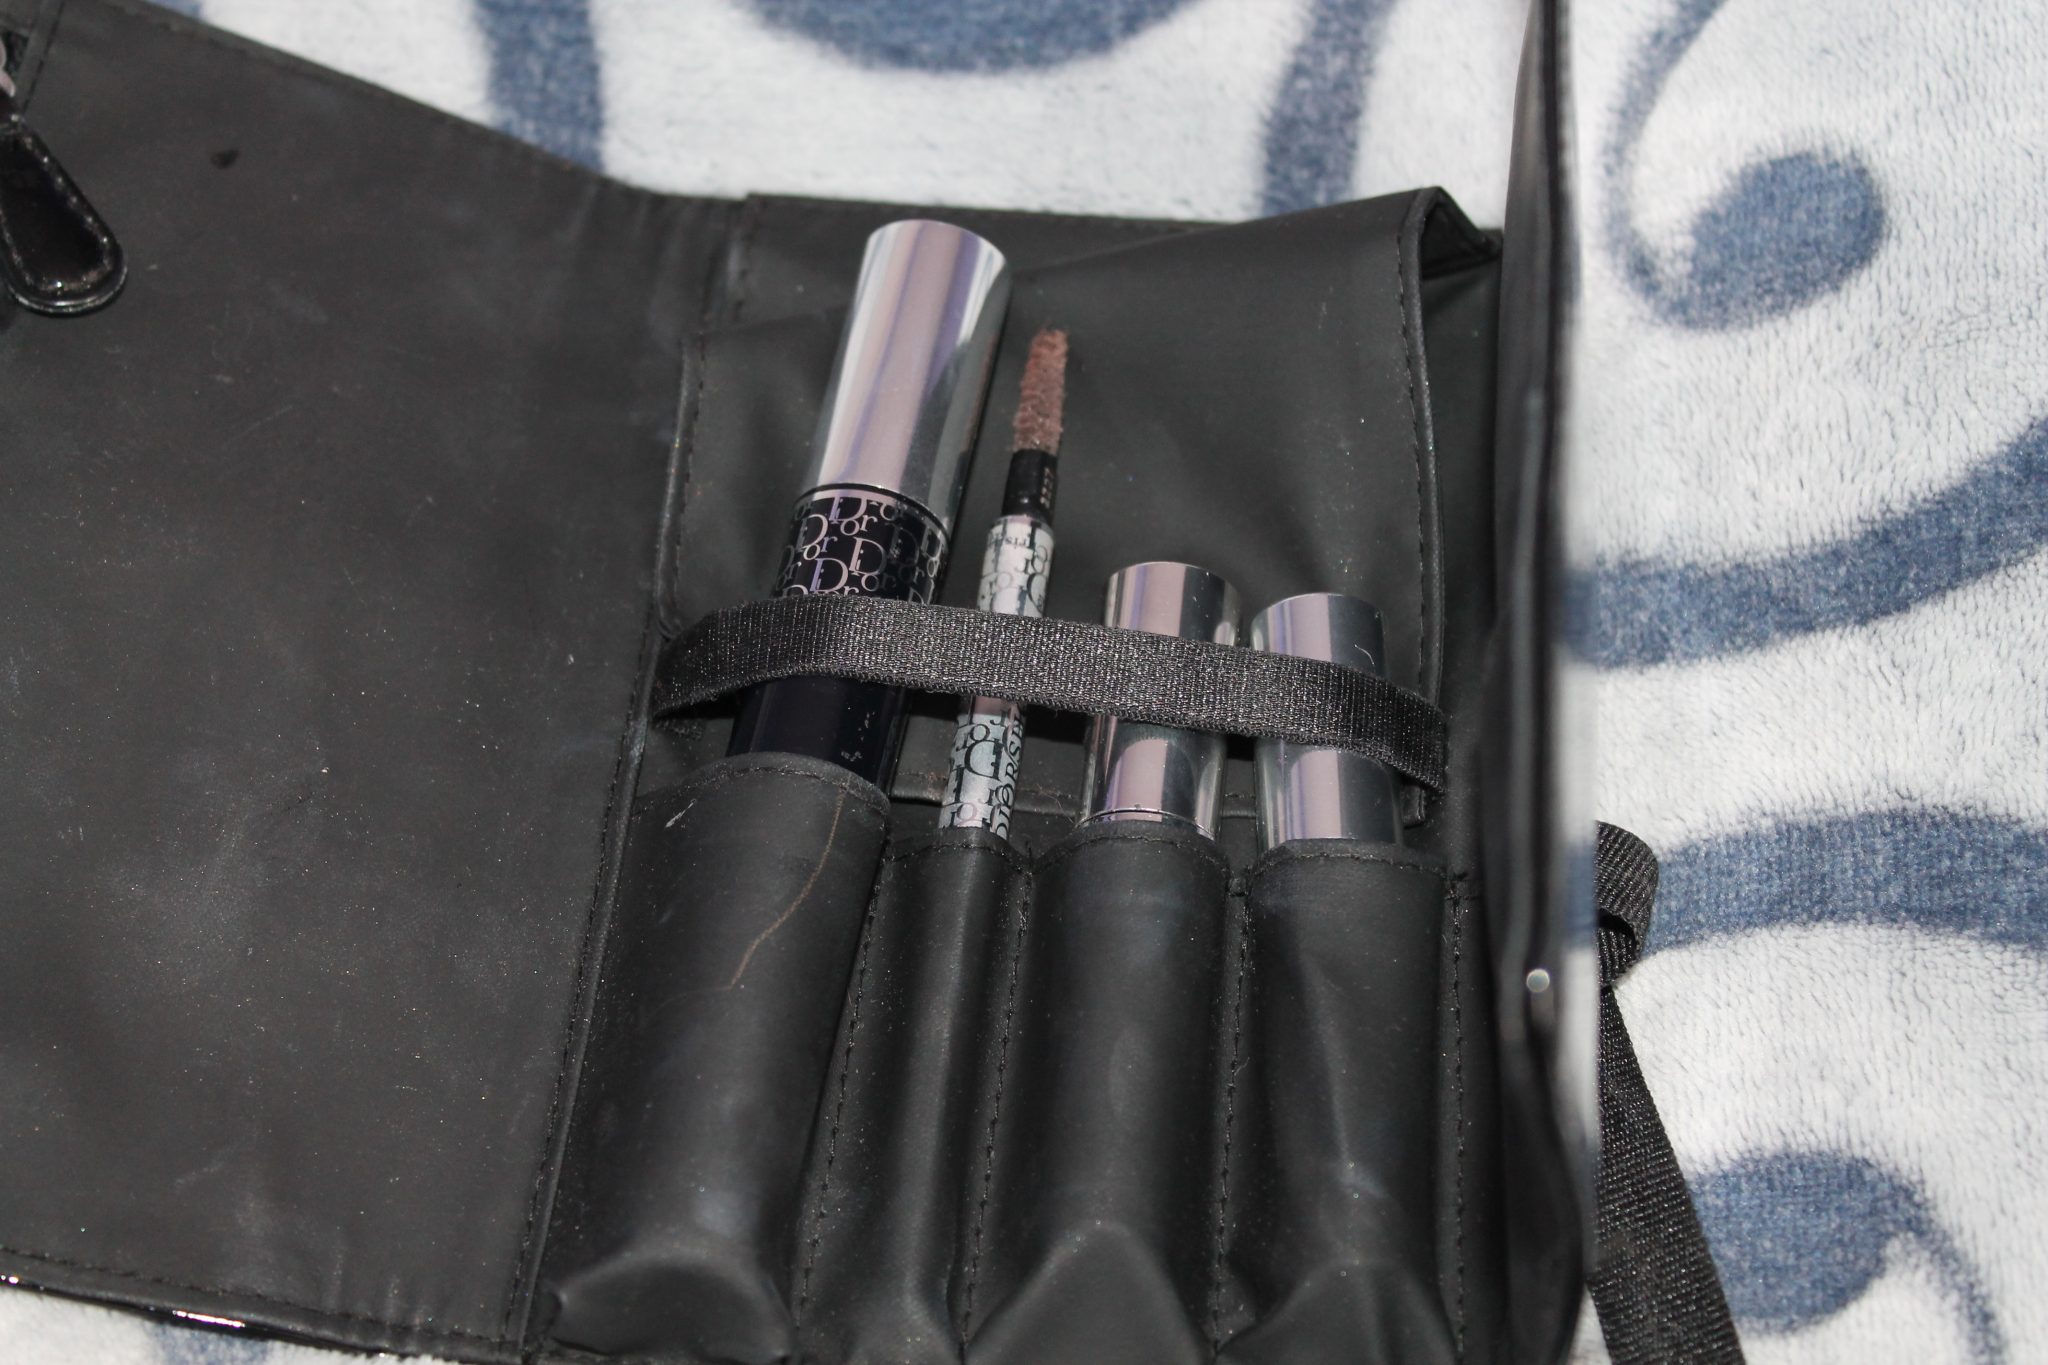 Dior: Diorshow Backstage Hero Kit and Giveaway from @Sephora